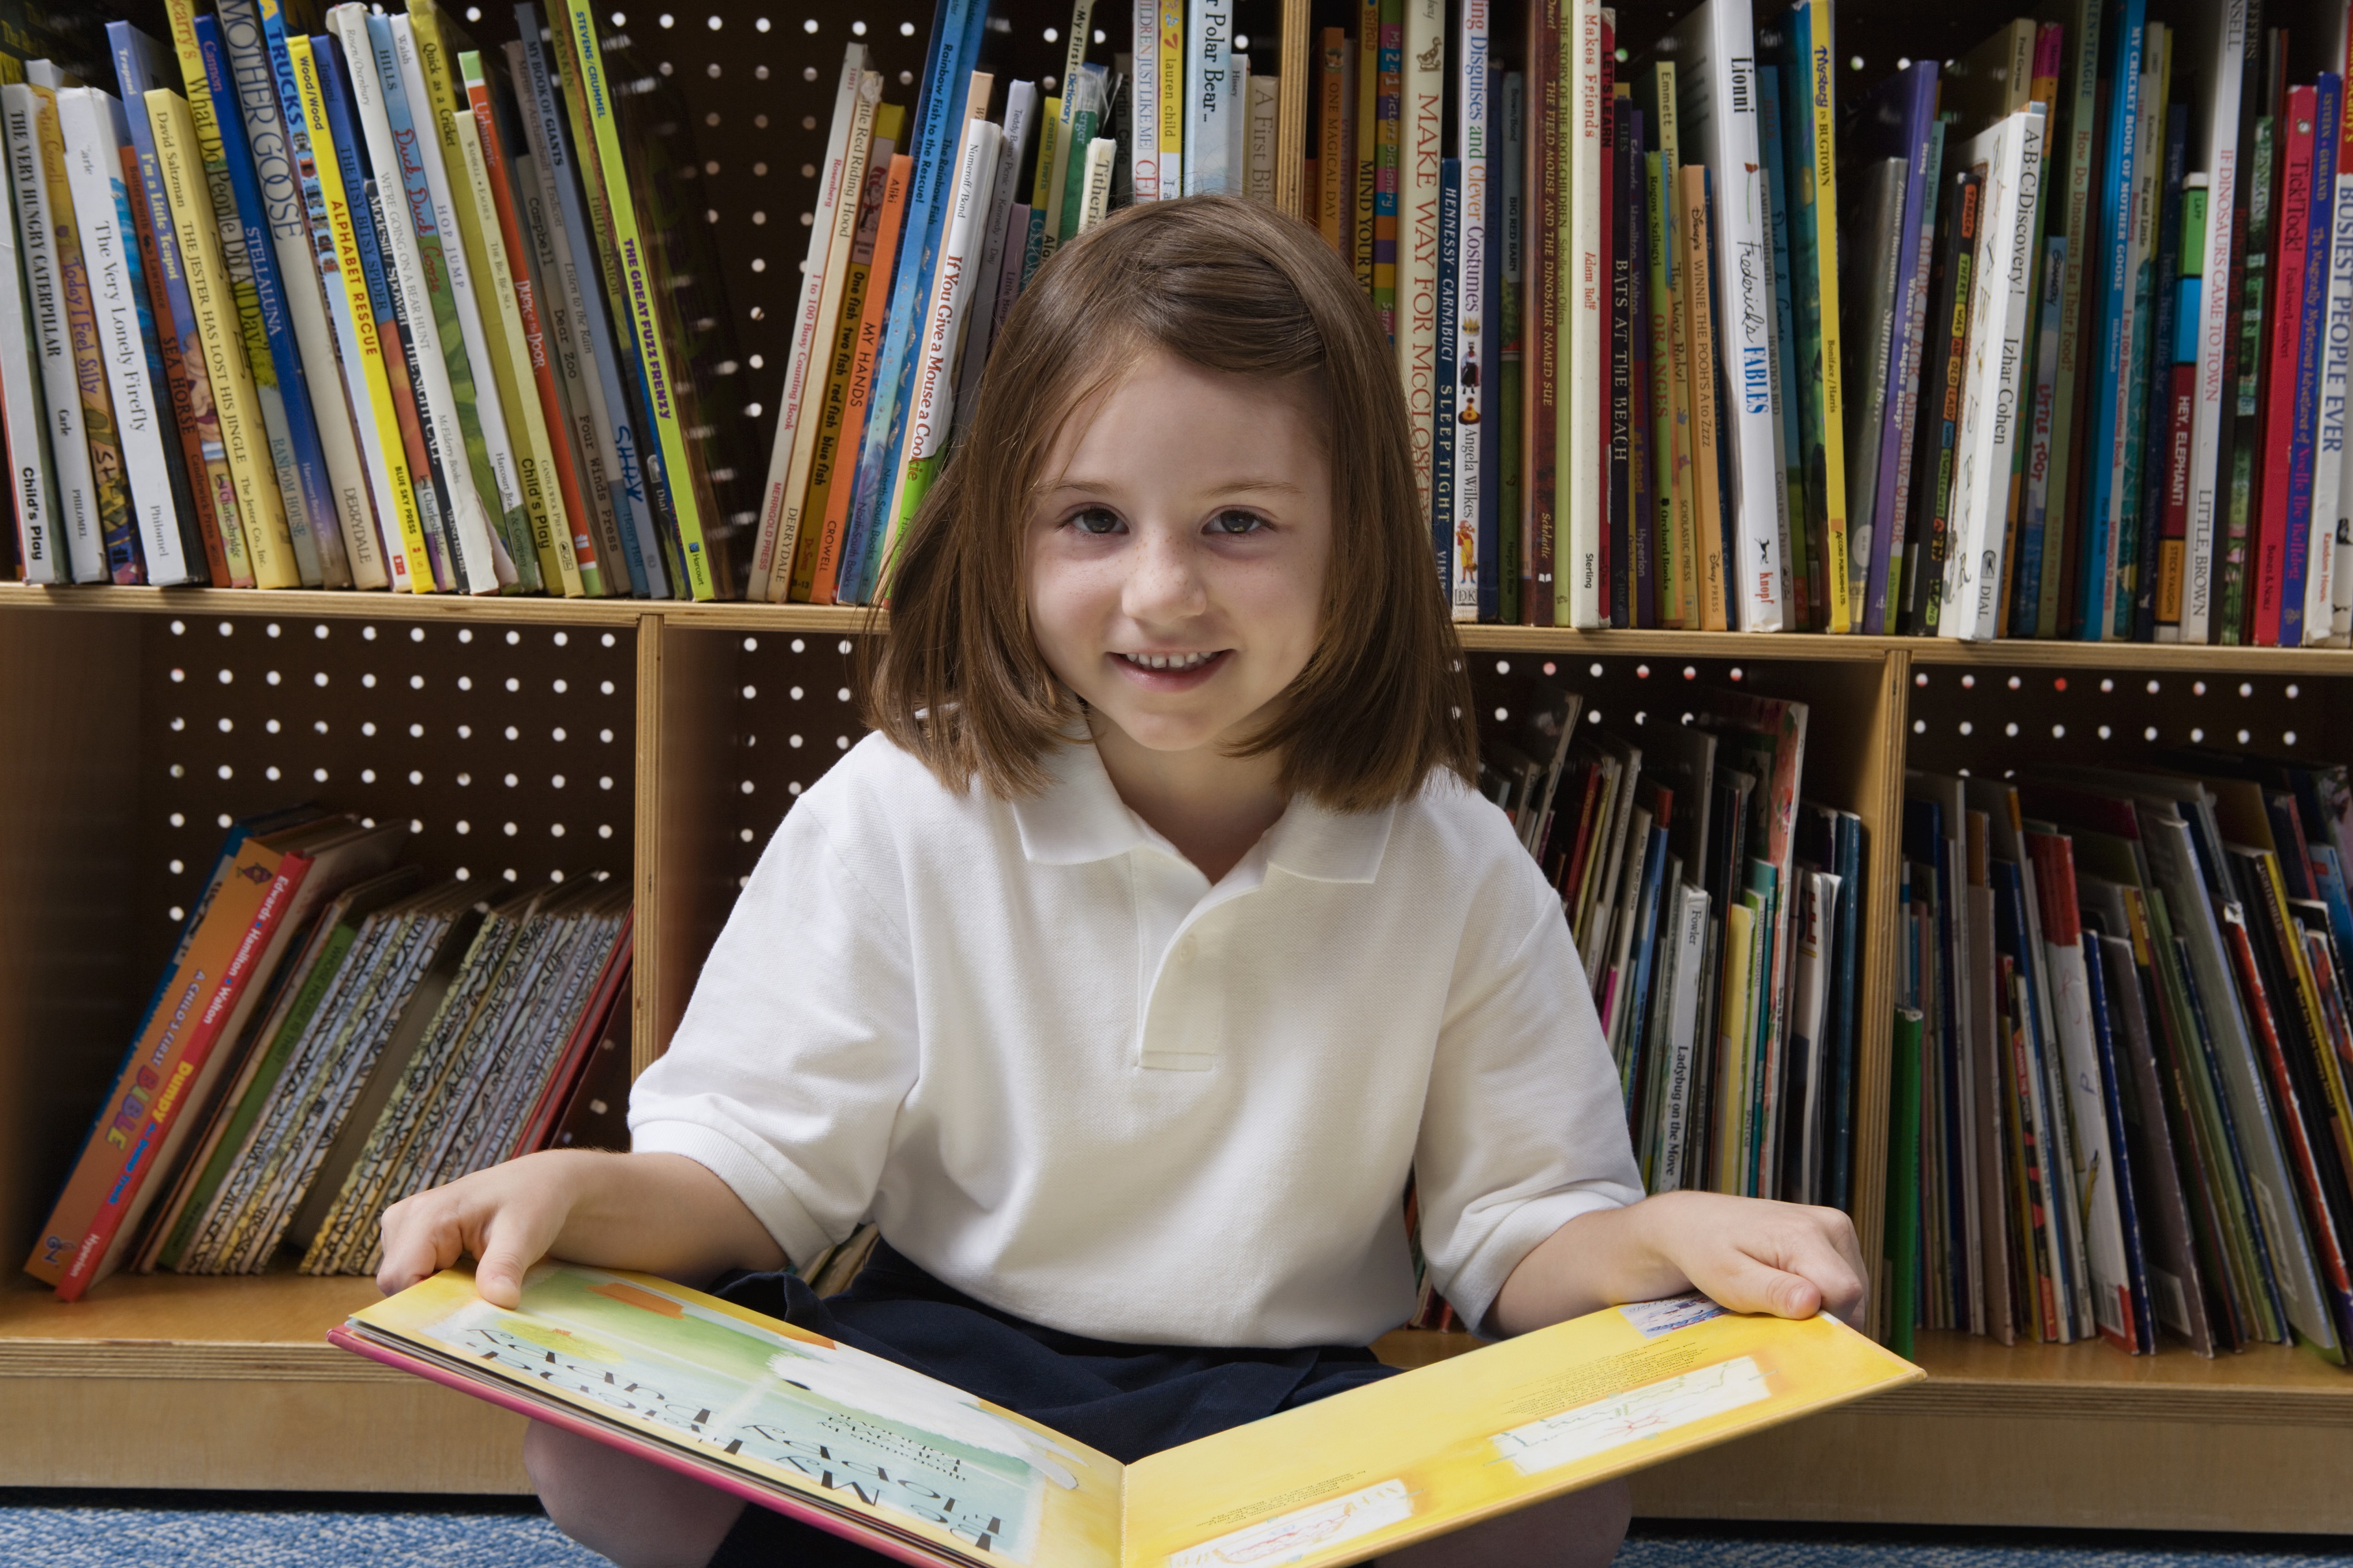 Little girl sits against a bookshelf with a book in a yellow cover open on her lap